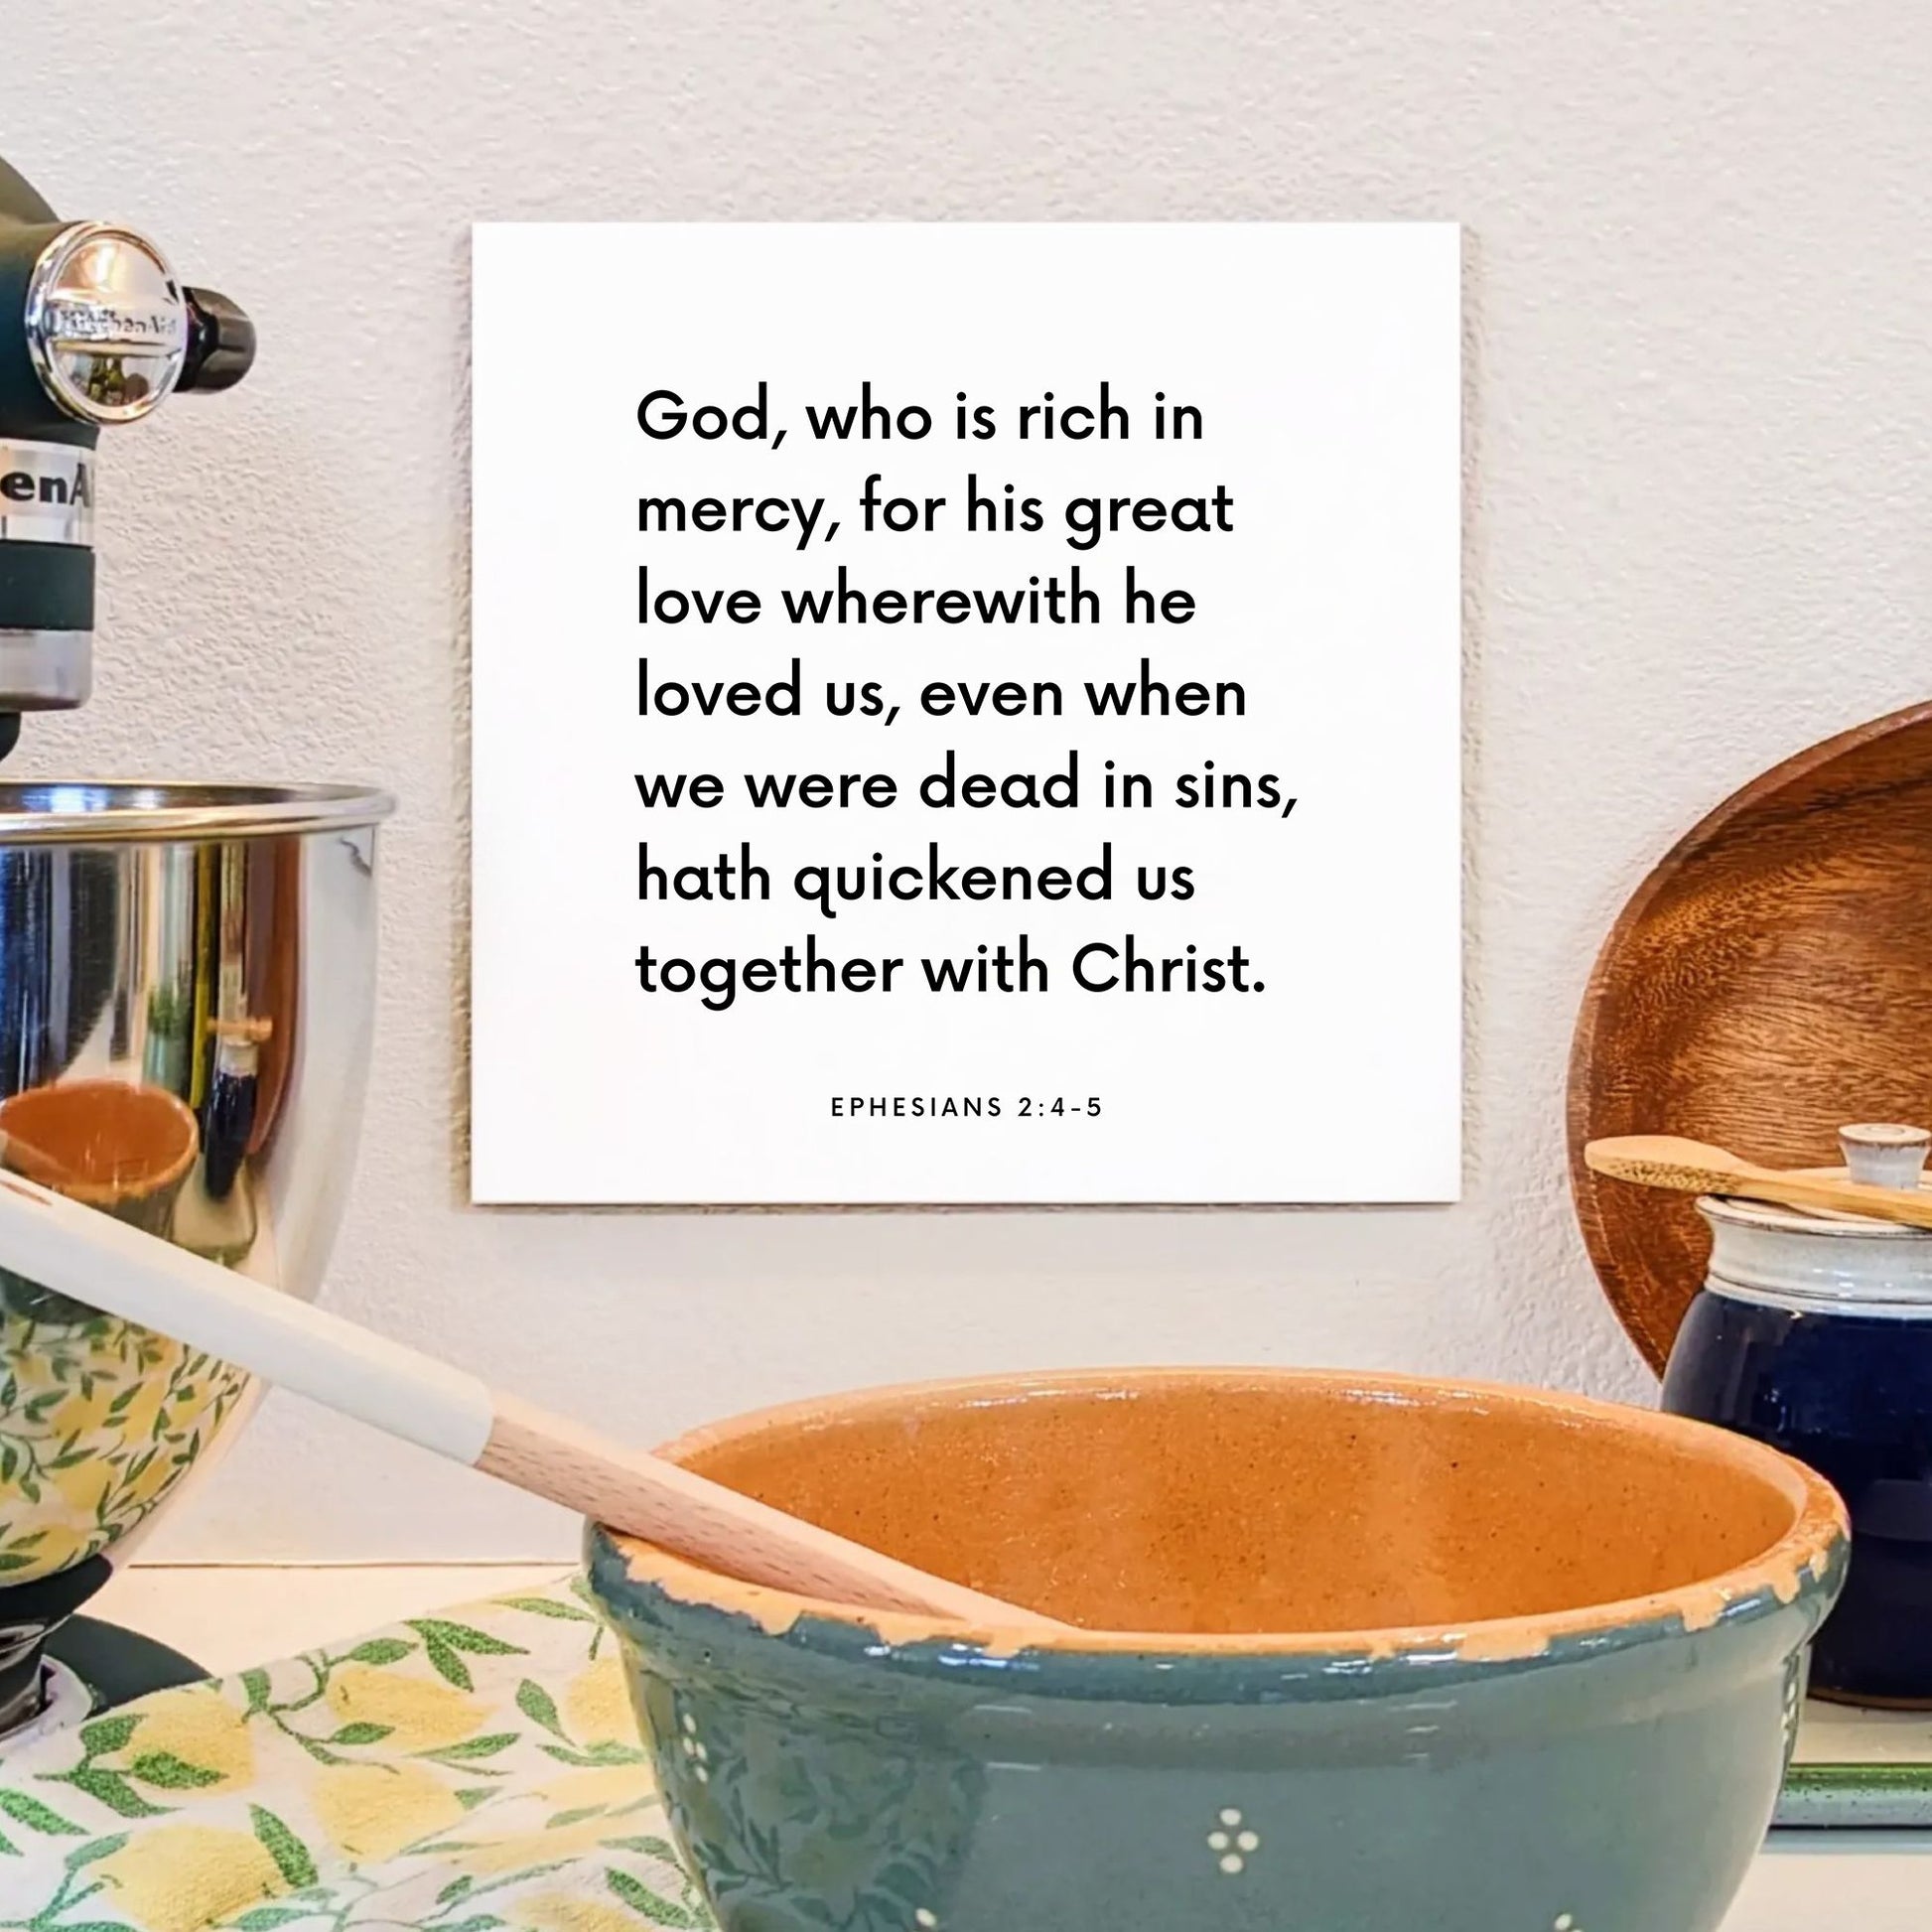 Kitchen mouting of the scripture tile for Ephesians 2:4-5 - "God, who is rich in mercy"